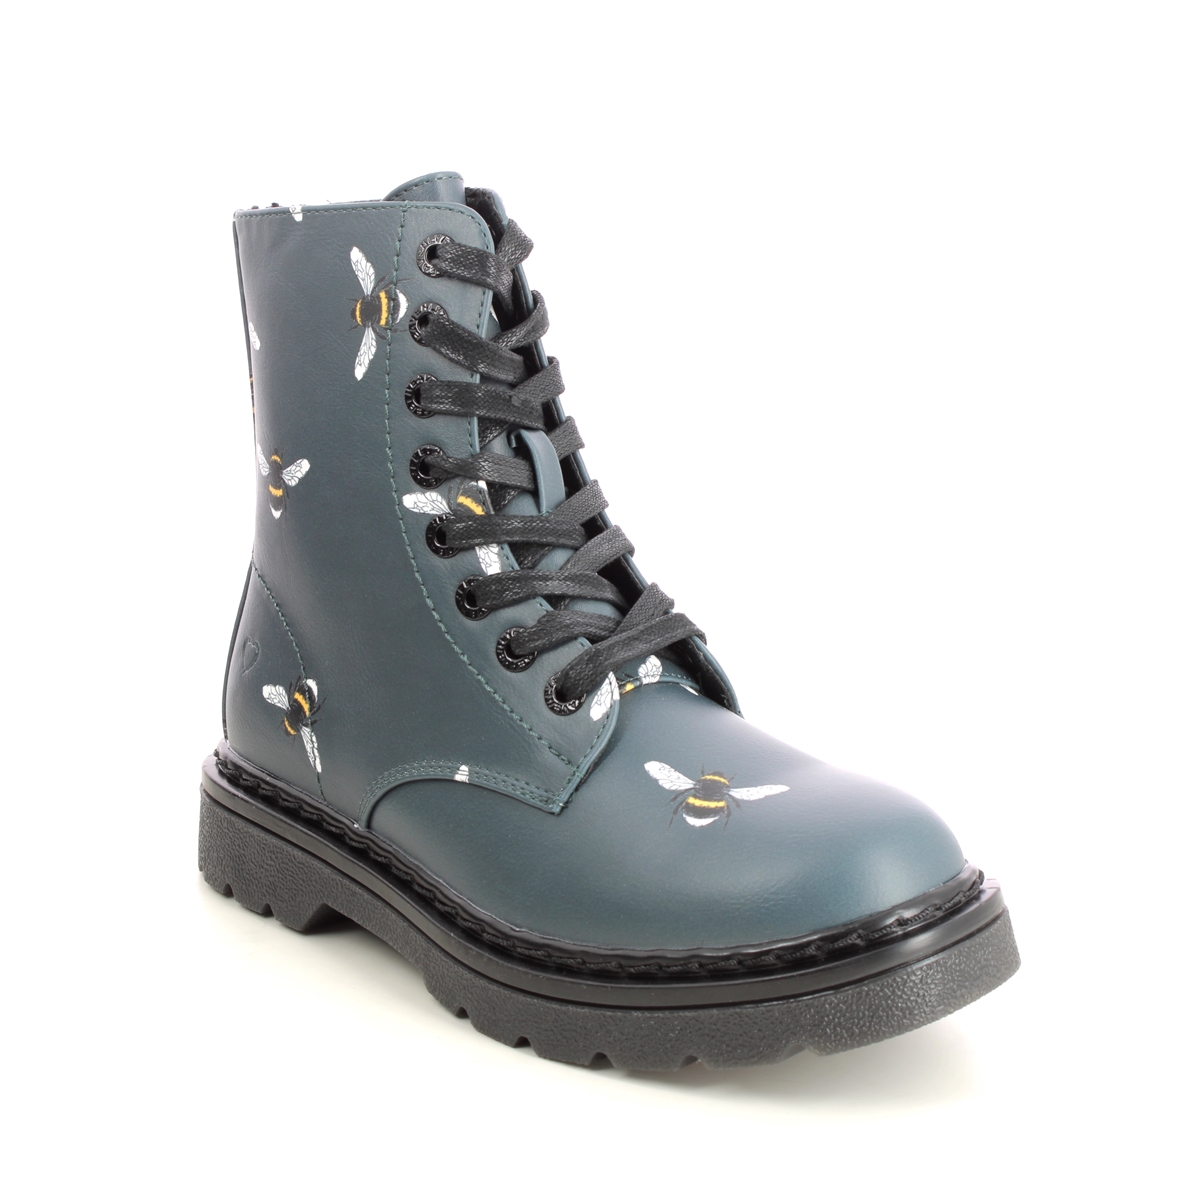 Heavenly Feet Justina 2 Bee Teal Blue Womens Biker Boots 3501-73 In Size 6 In Plain Teal Blue